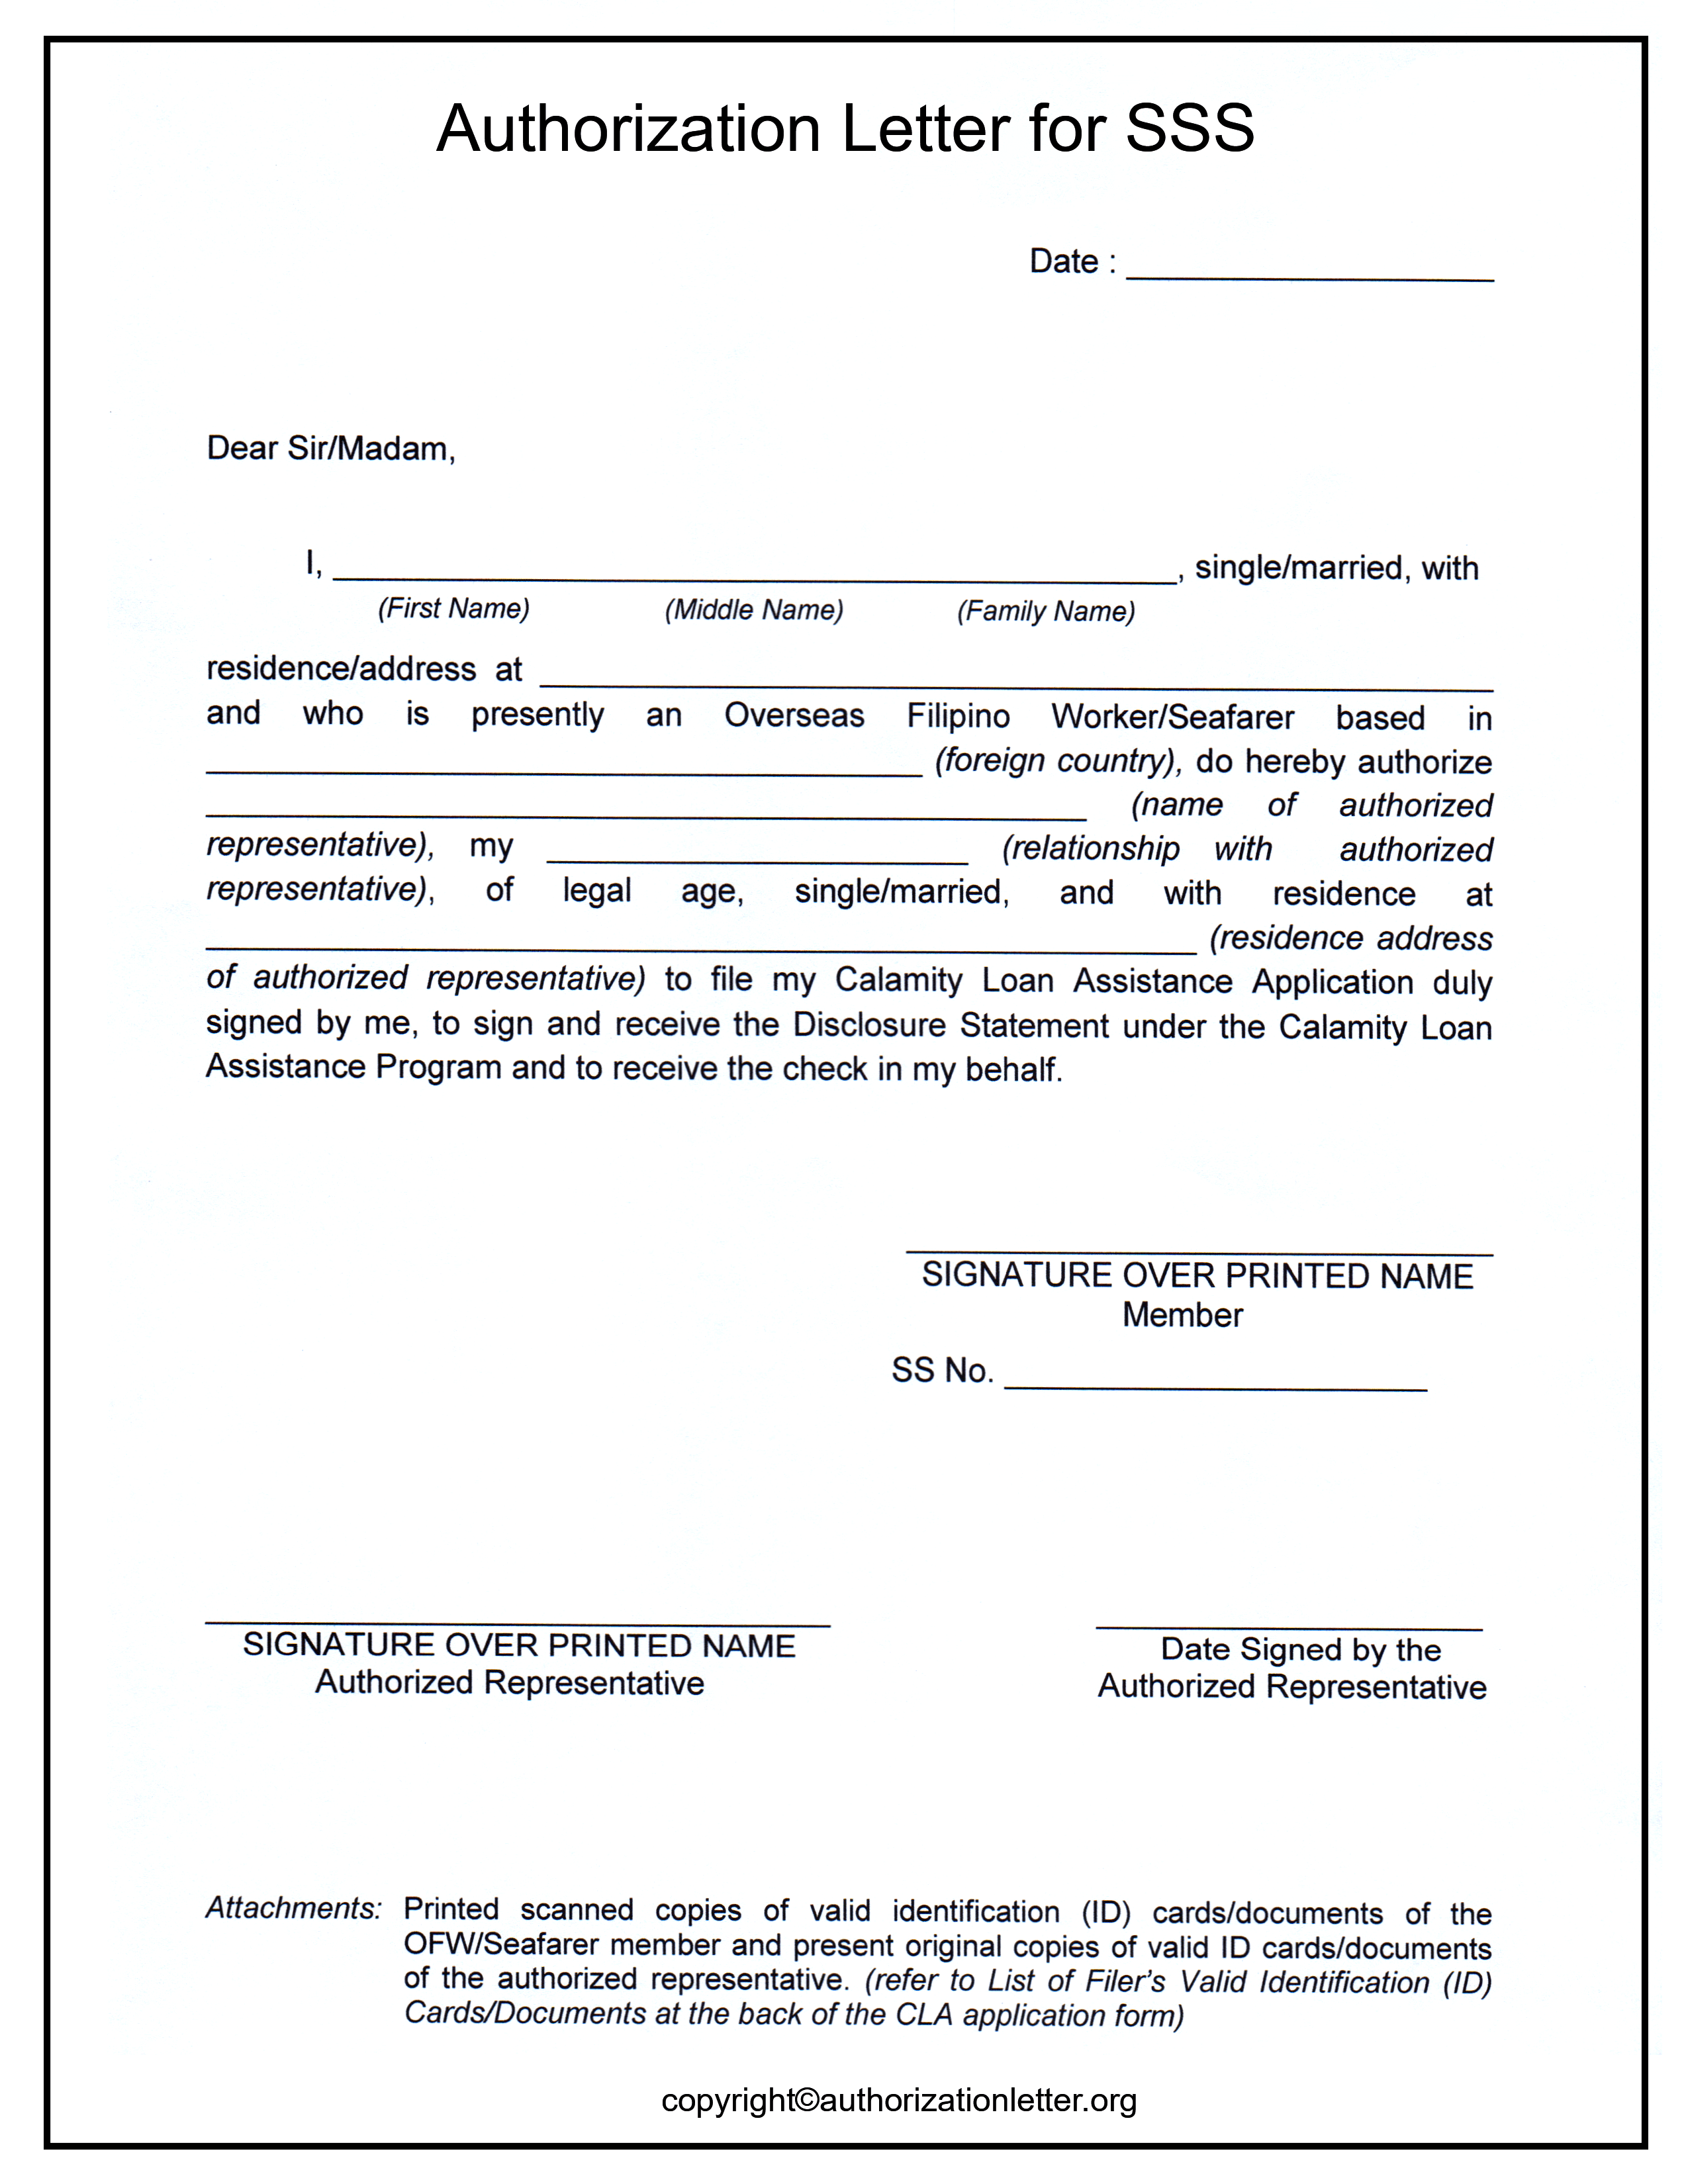 Authorization Letter For SSS Loan